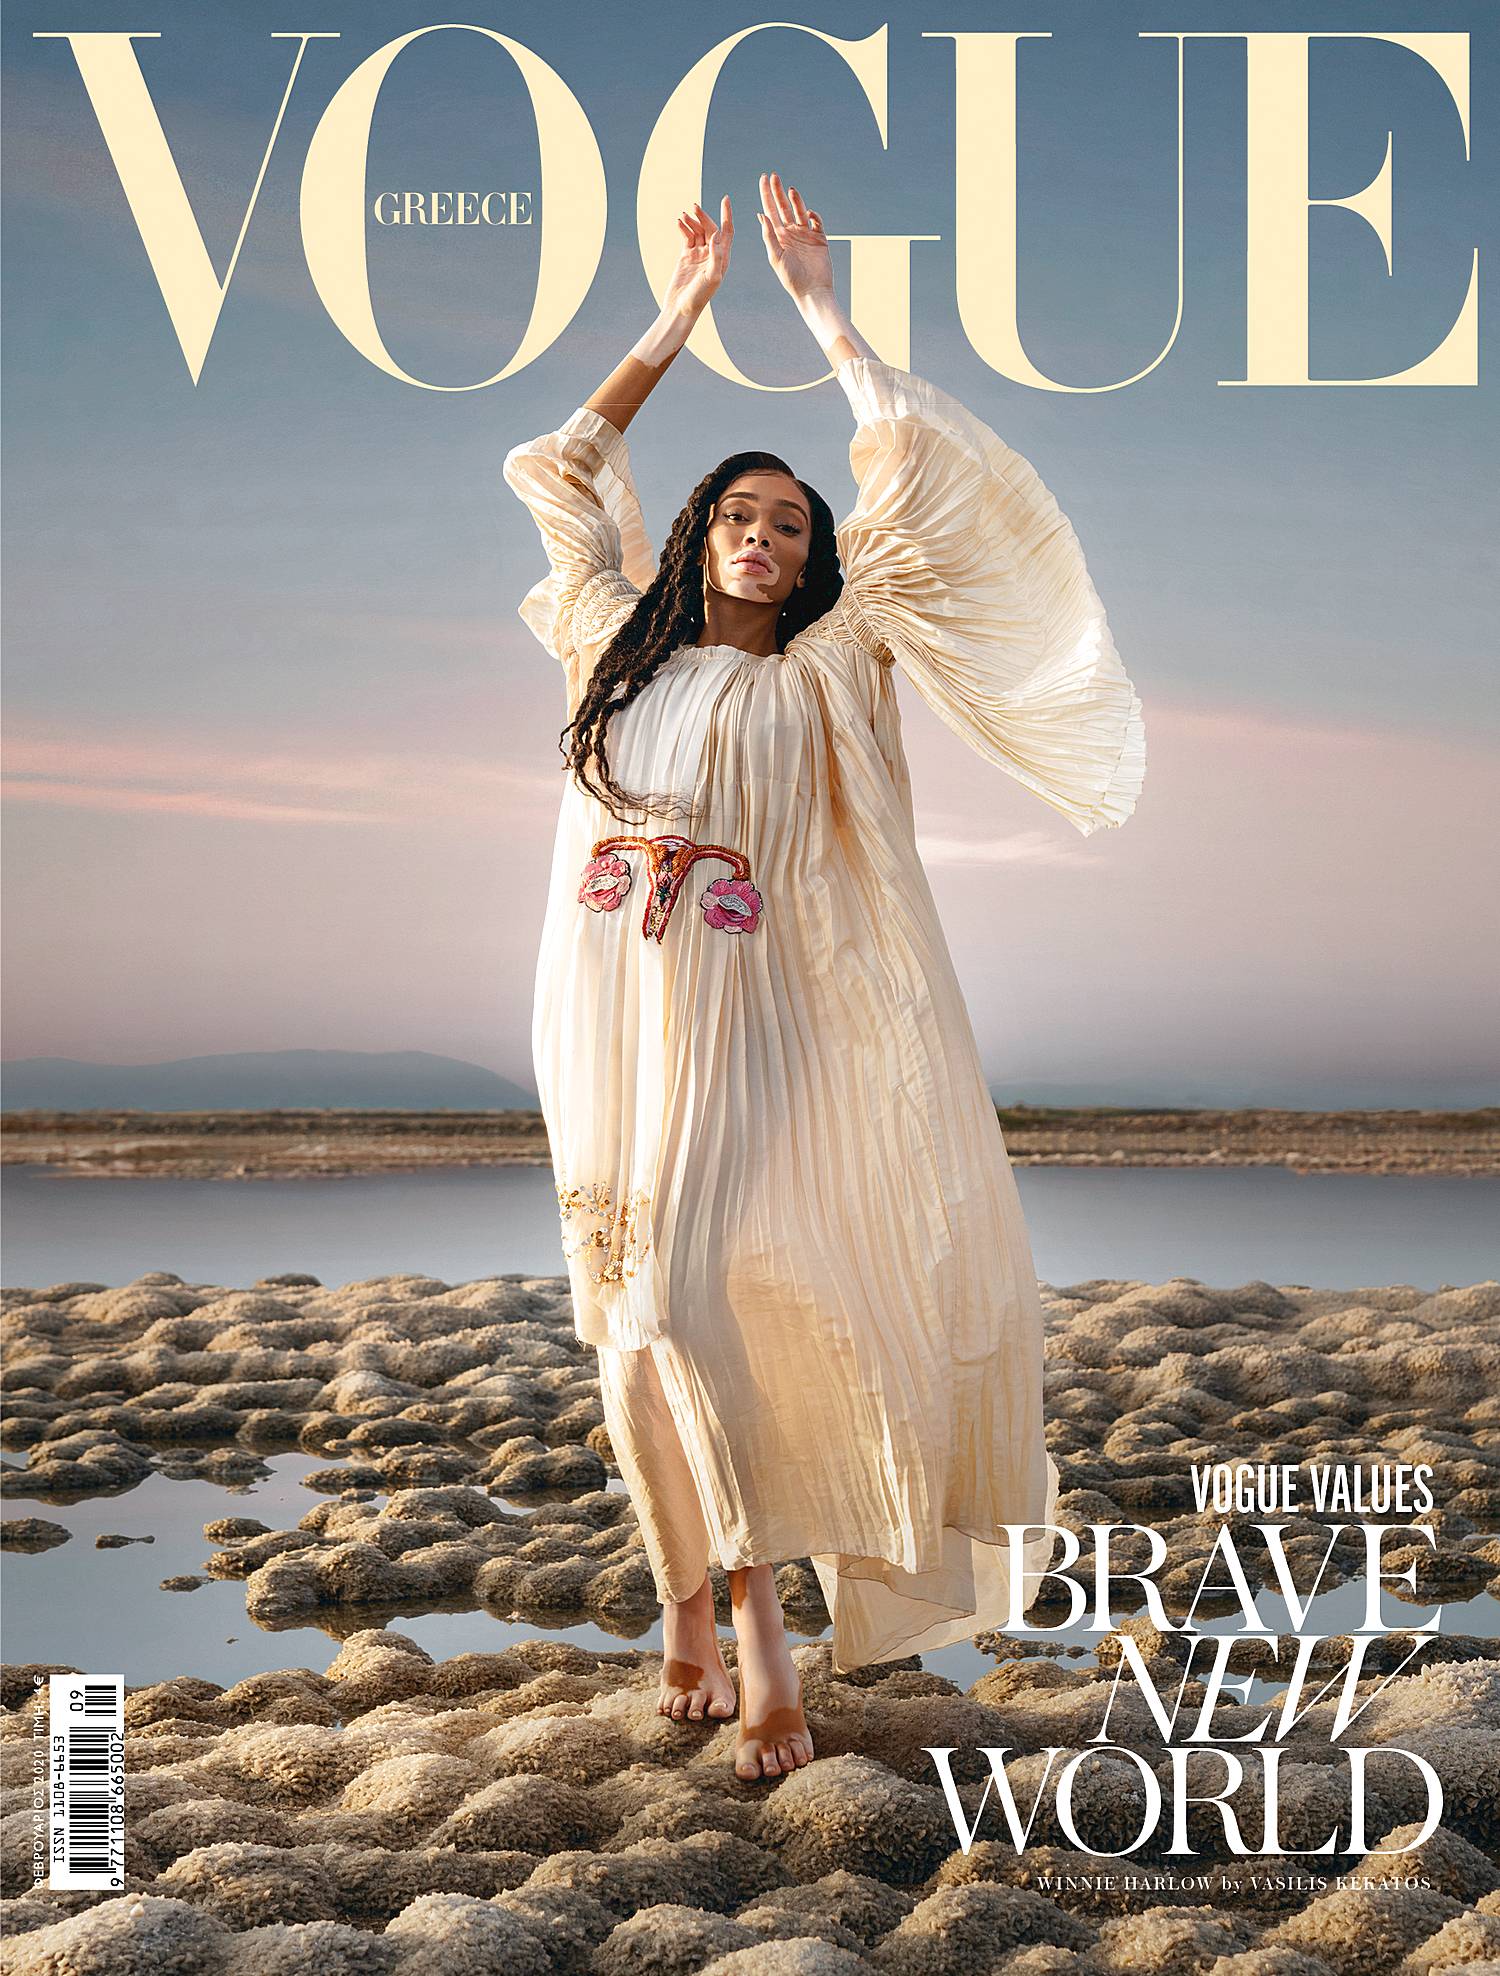 Vogue Greece celebrated the 5 year anniversary with a sensational 